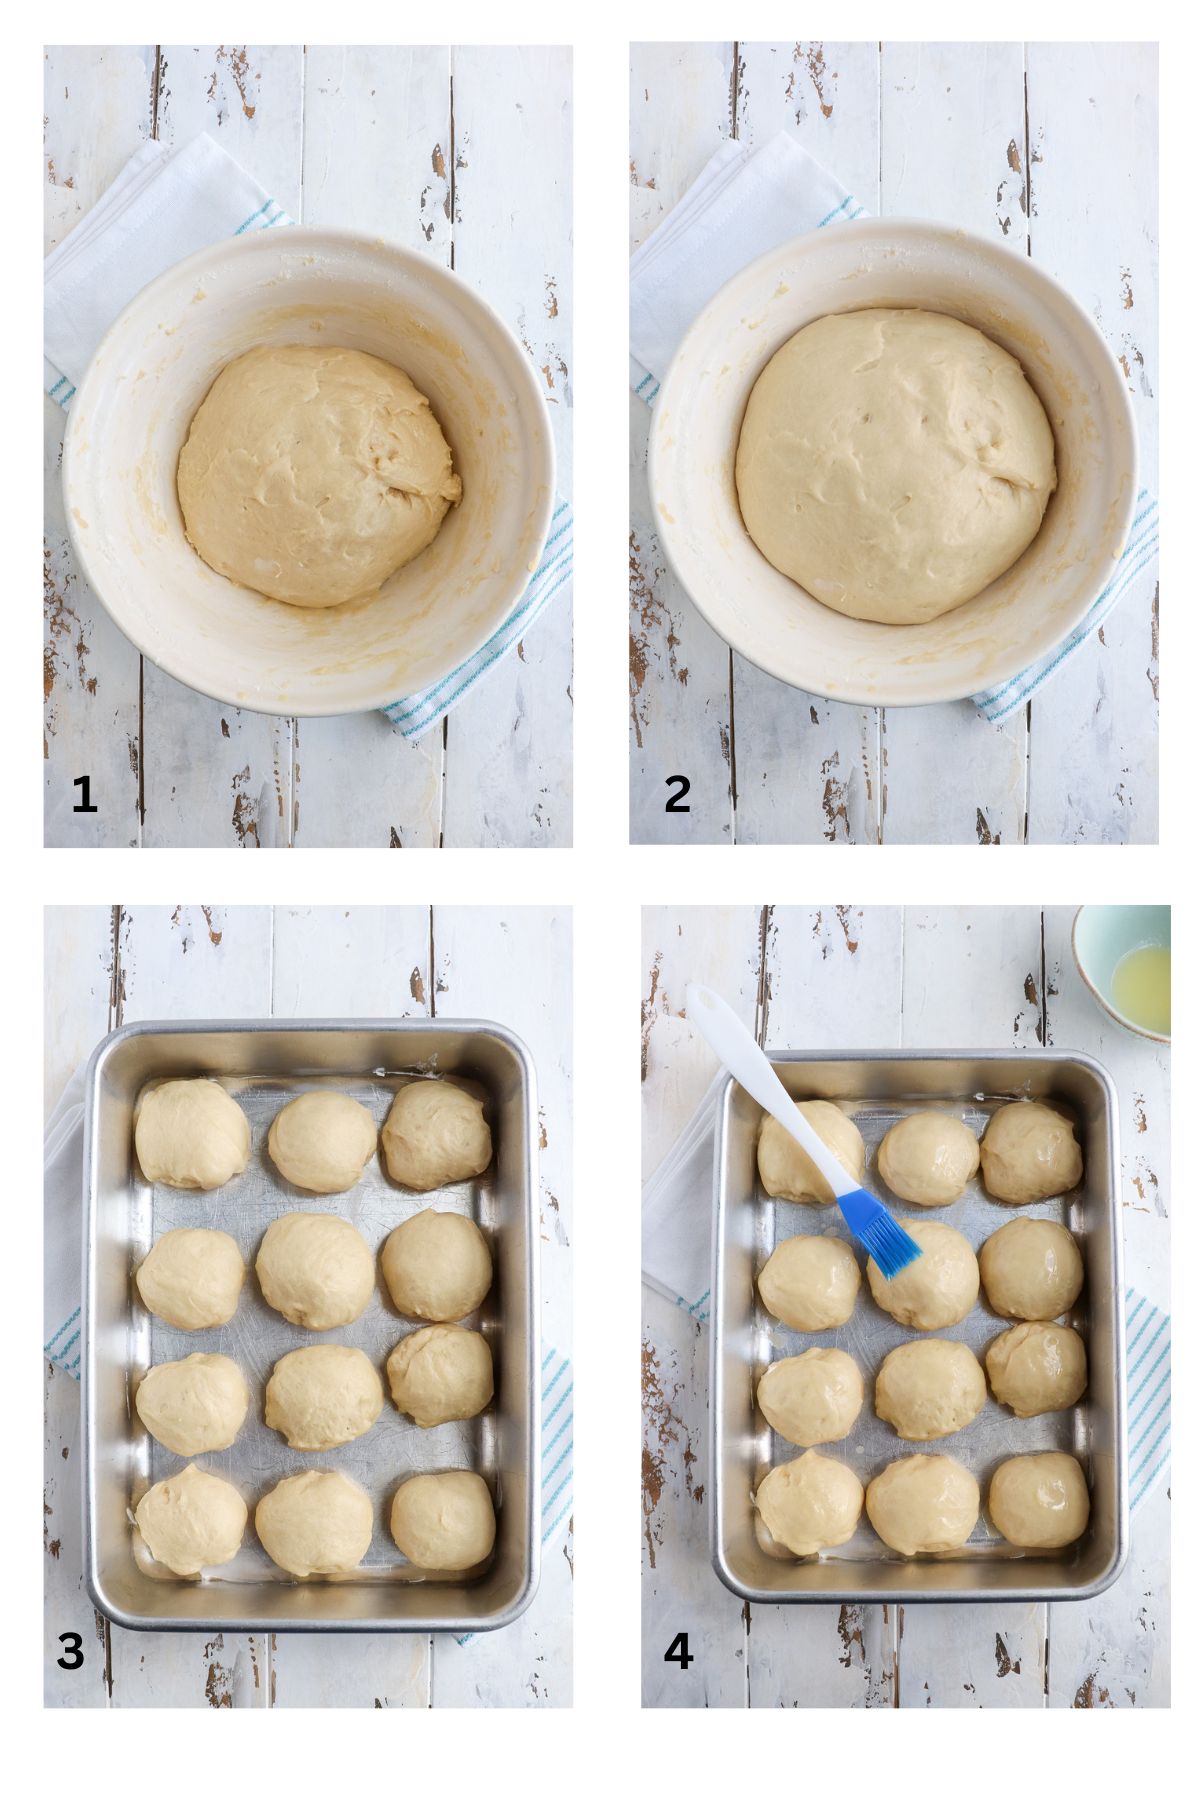 steps involved in rising dough to shaping into golf ball sized pieces